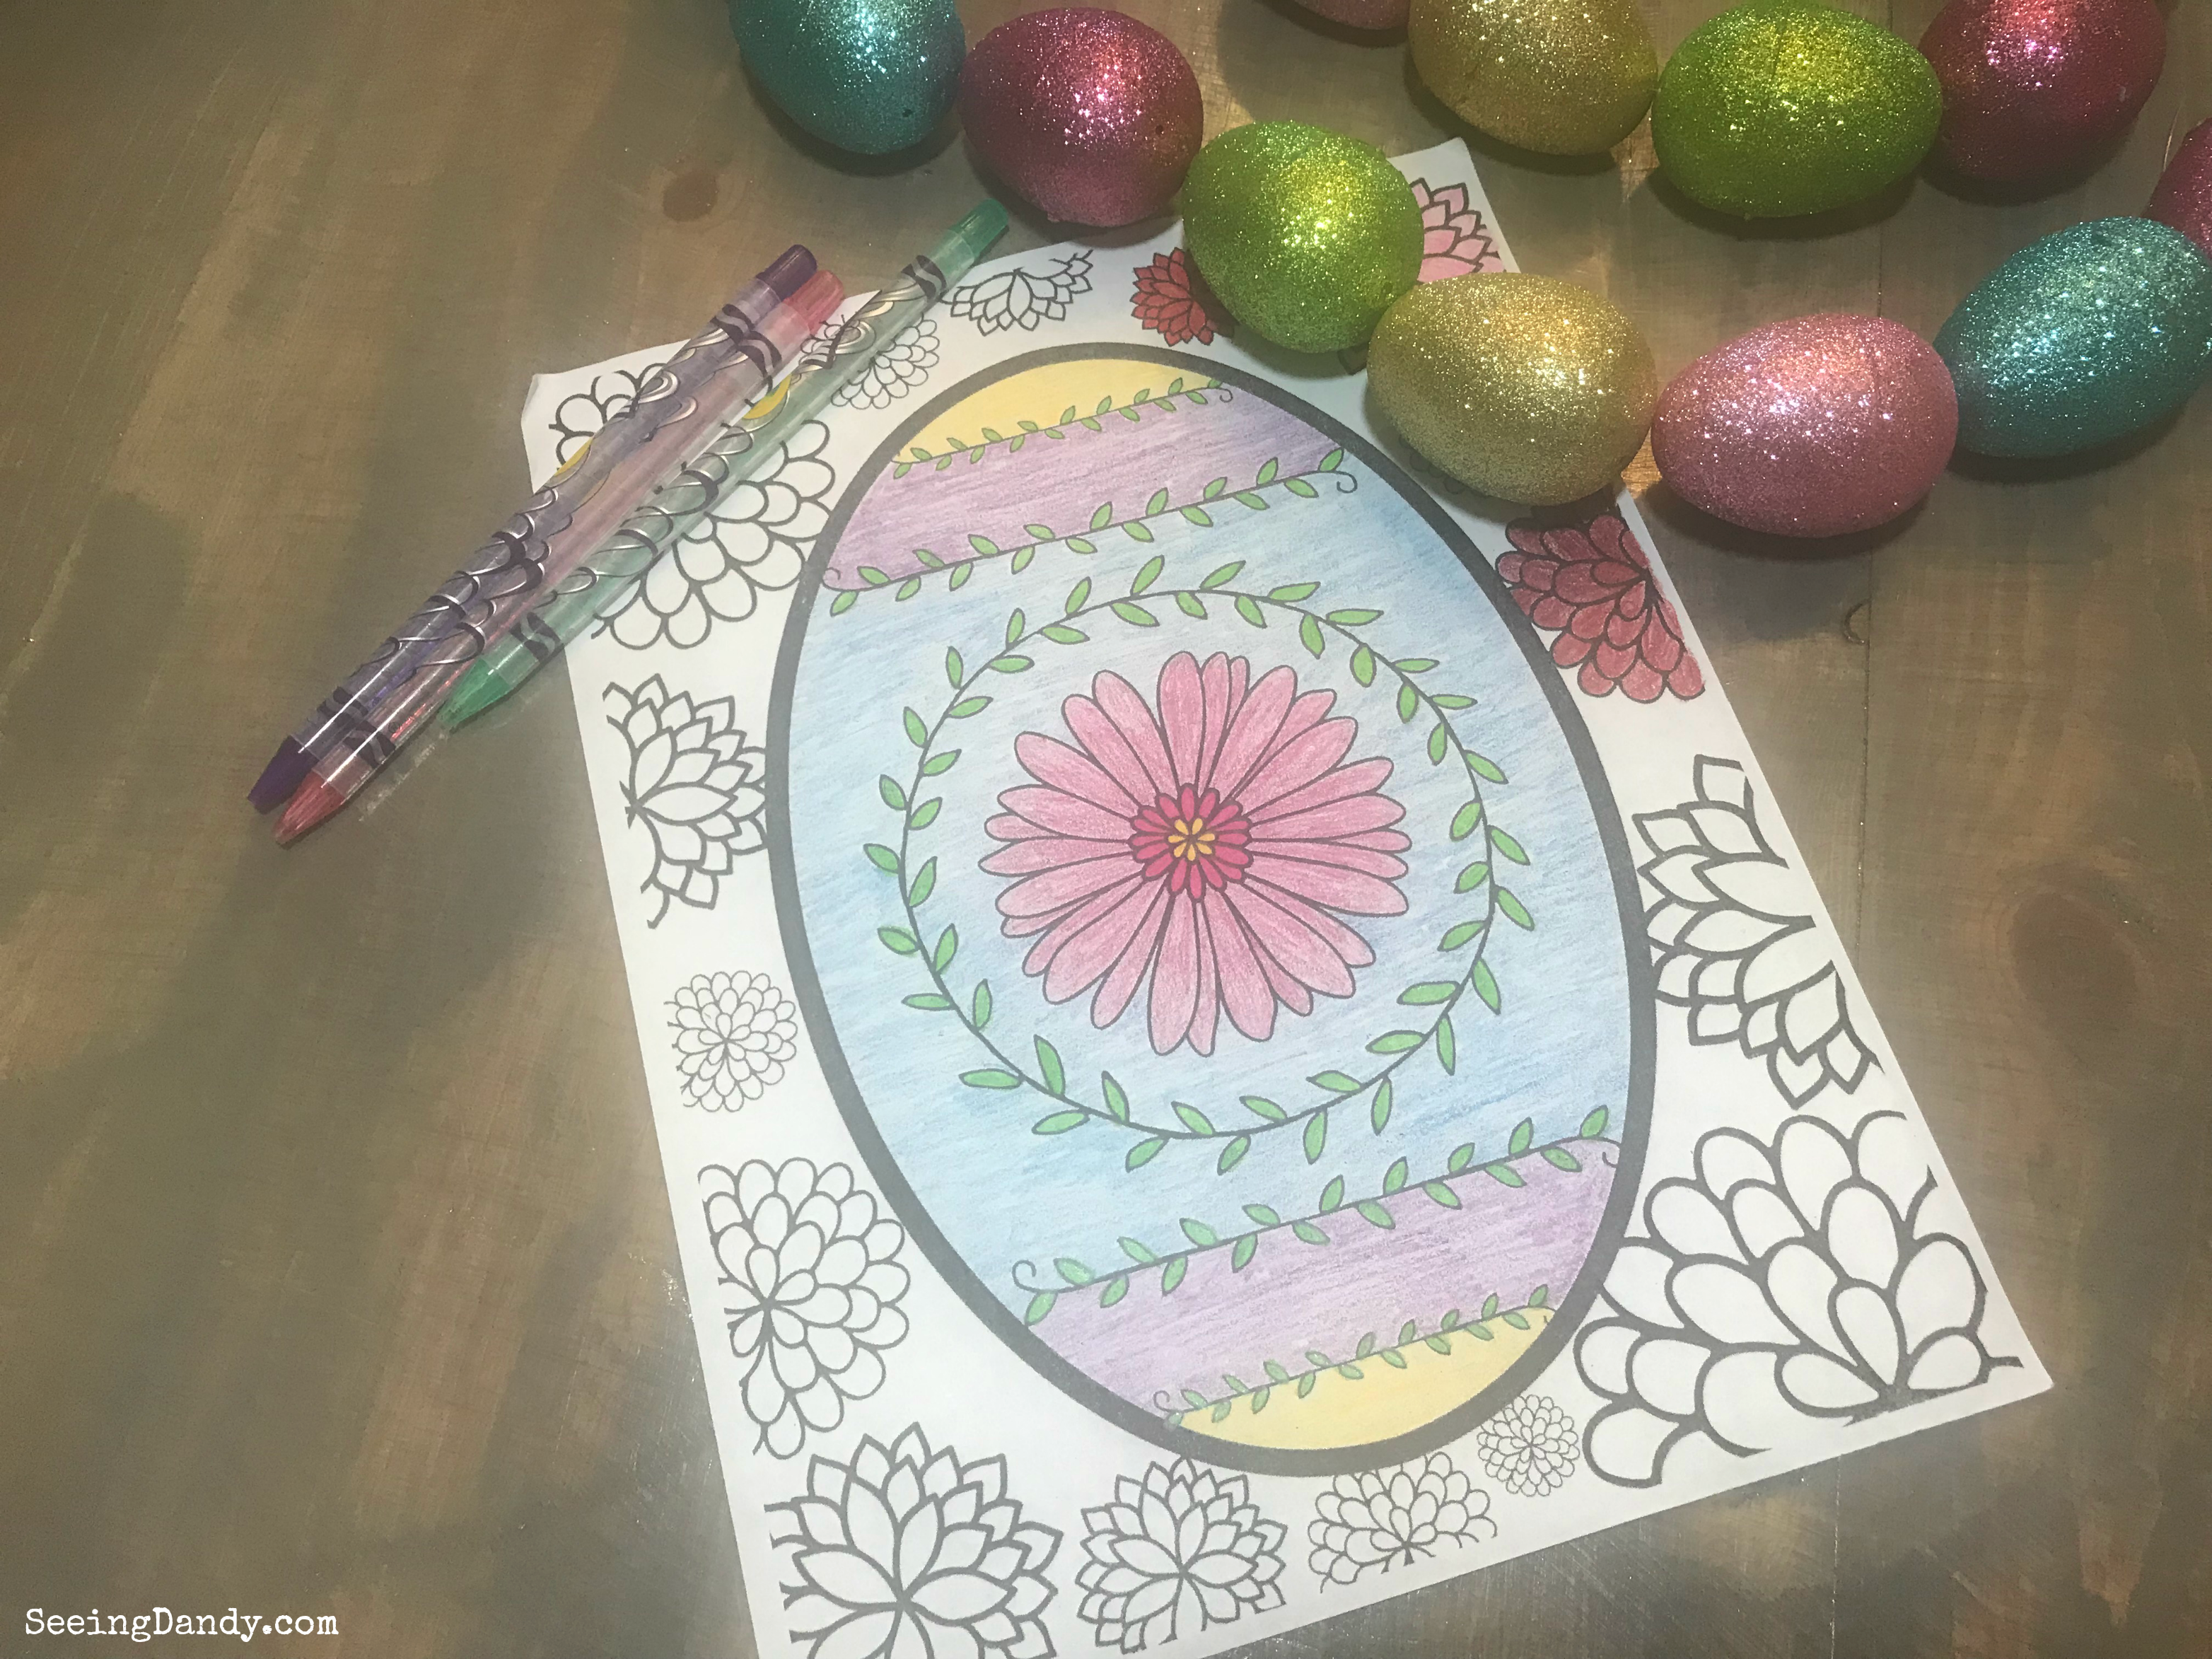 Free printable Easter egg coloring page that is Faberge egg style.